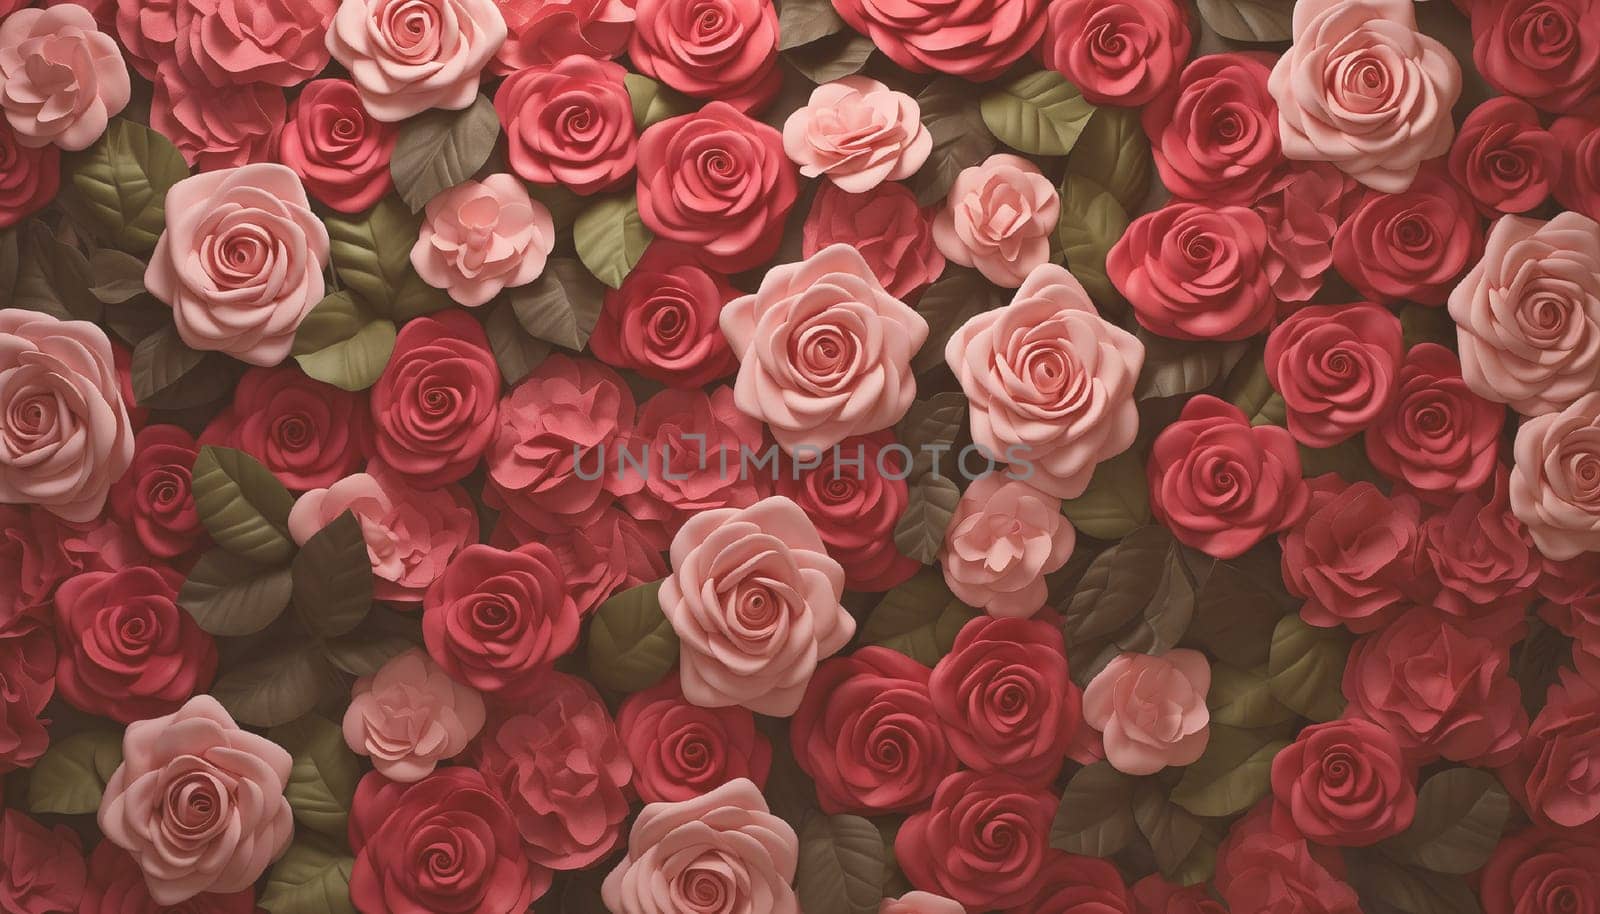 Pink and white rose flowers wall. Top view flower wall background.